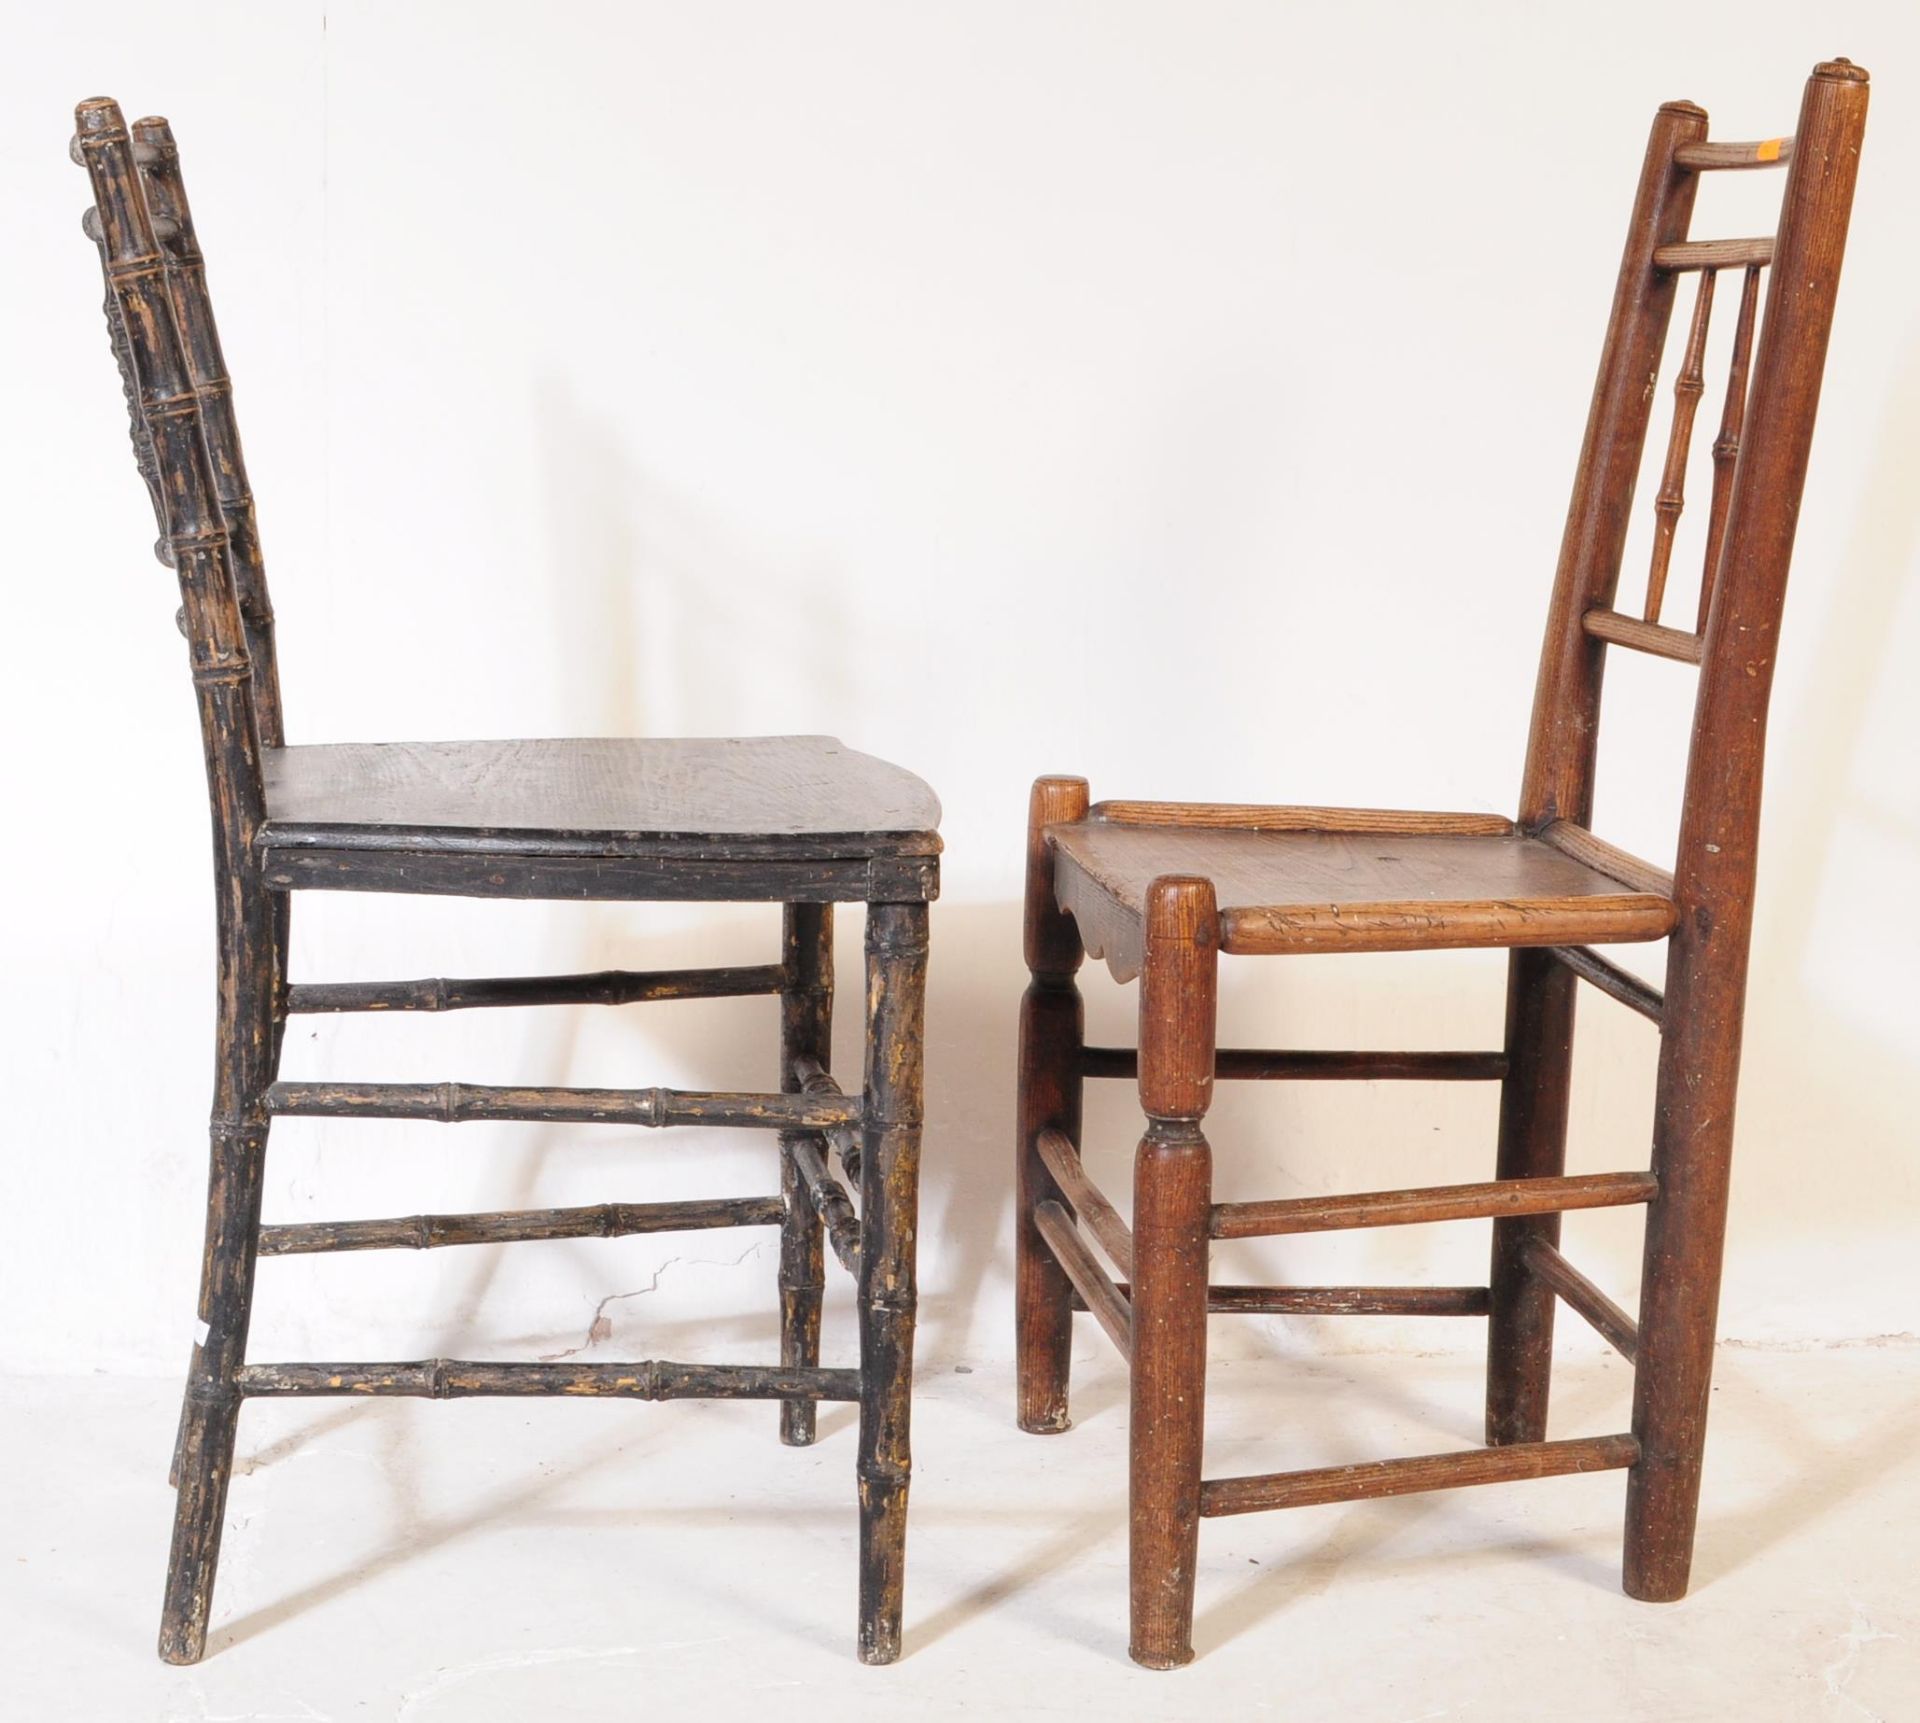 TWO 19TH CENTURY VICTORIAN CHAIRS - WILLIAM BIRCH MANNER - Image 8 of 8